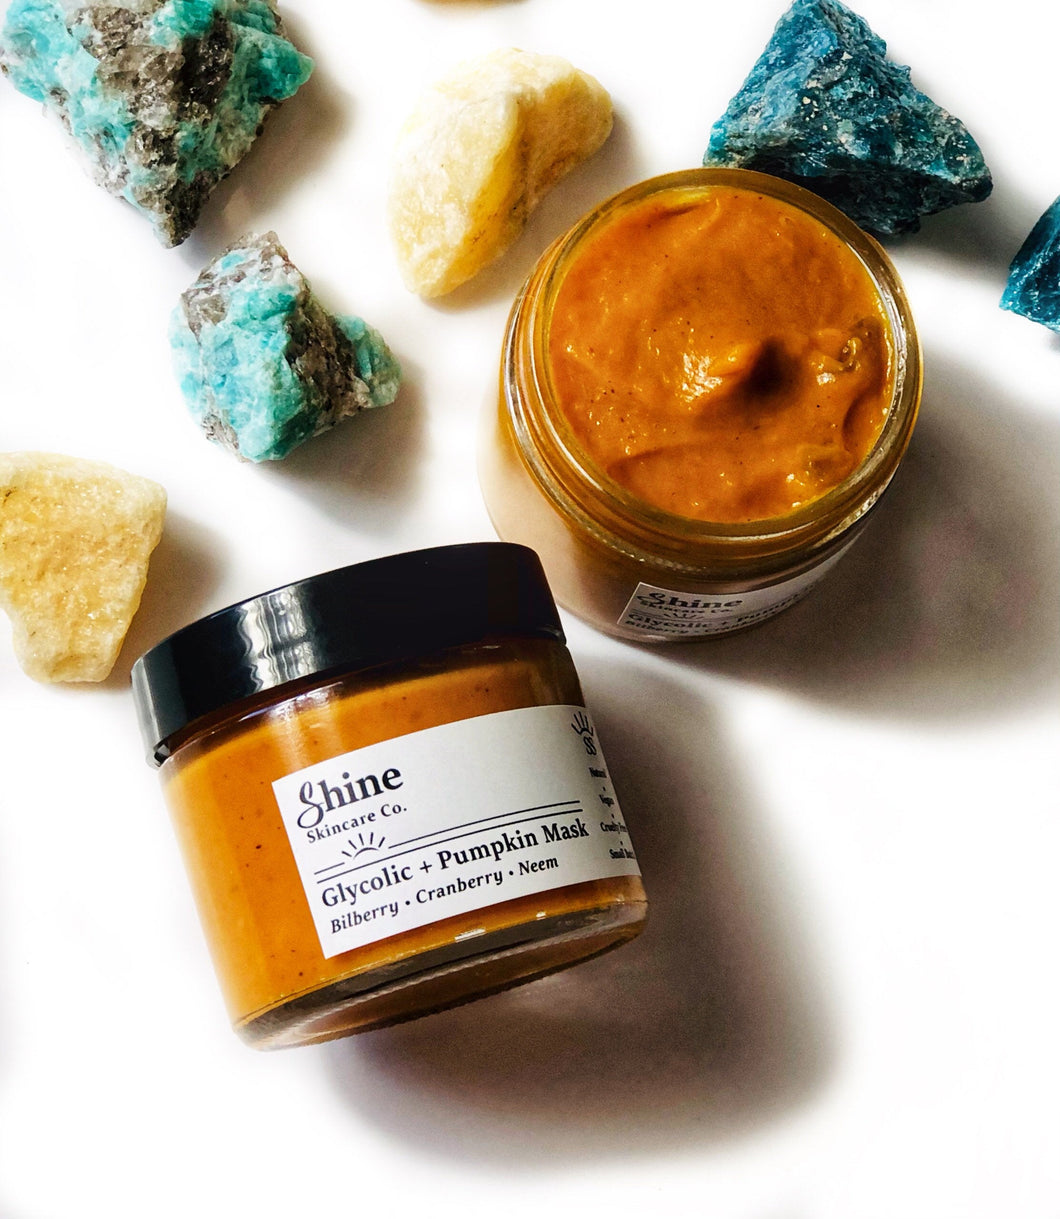 Glycolic + Pumpkin Enzyme - Face Mask - Facial Mask - Natural Skincare - Exfoliating Mask - Cruelty Free Skincare